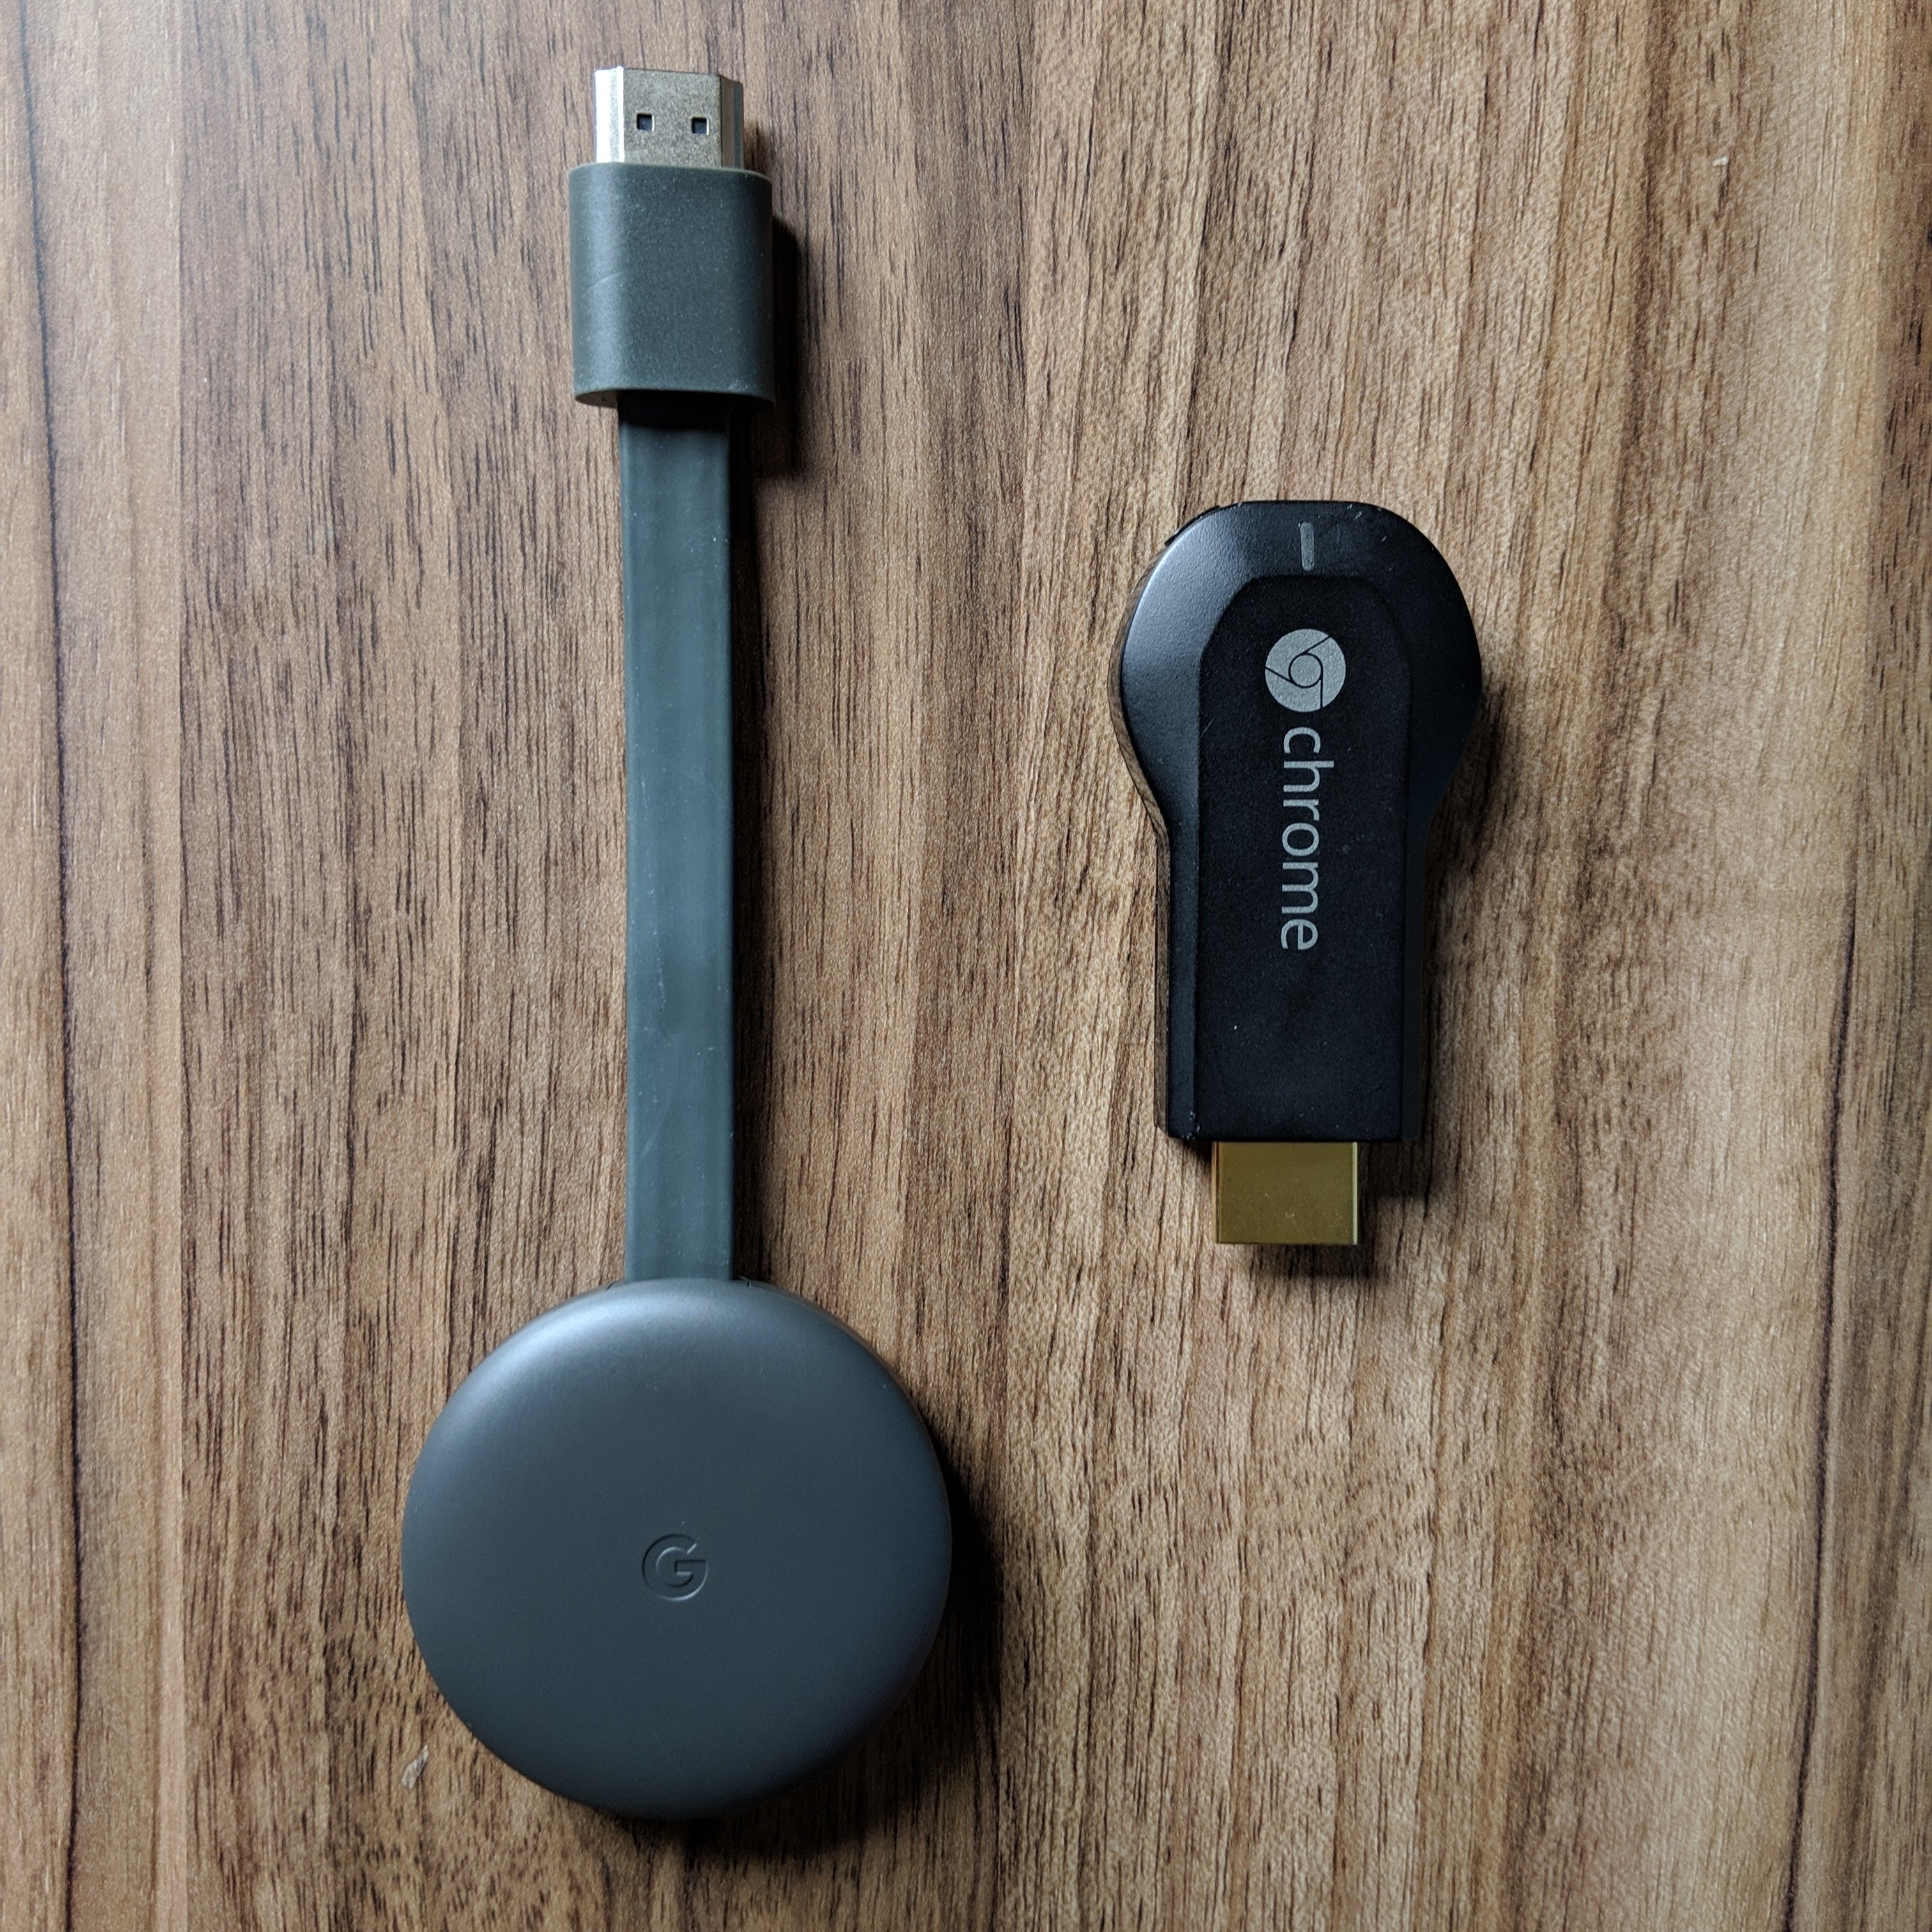 Chromecast (2018) review Google's revamped media streamer is what you